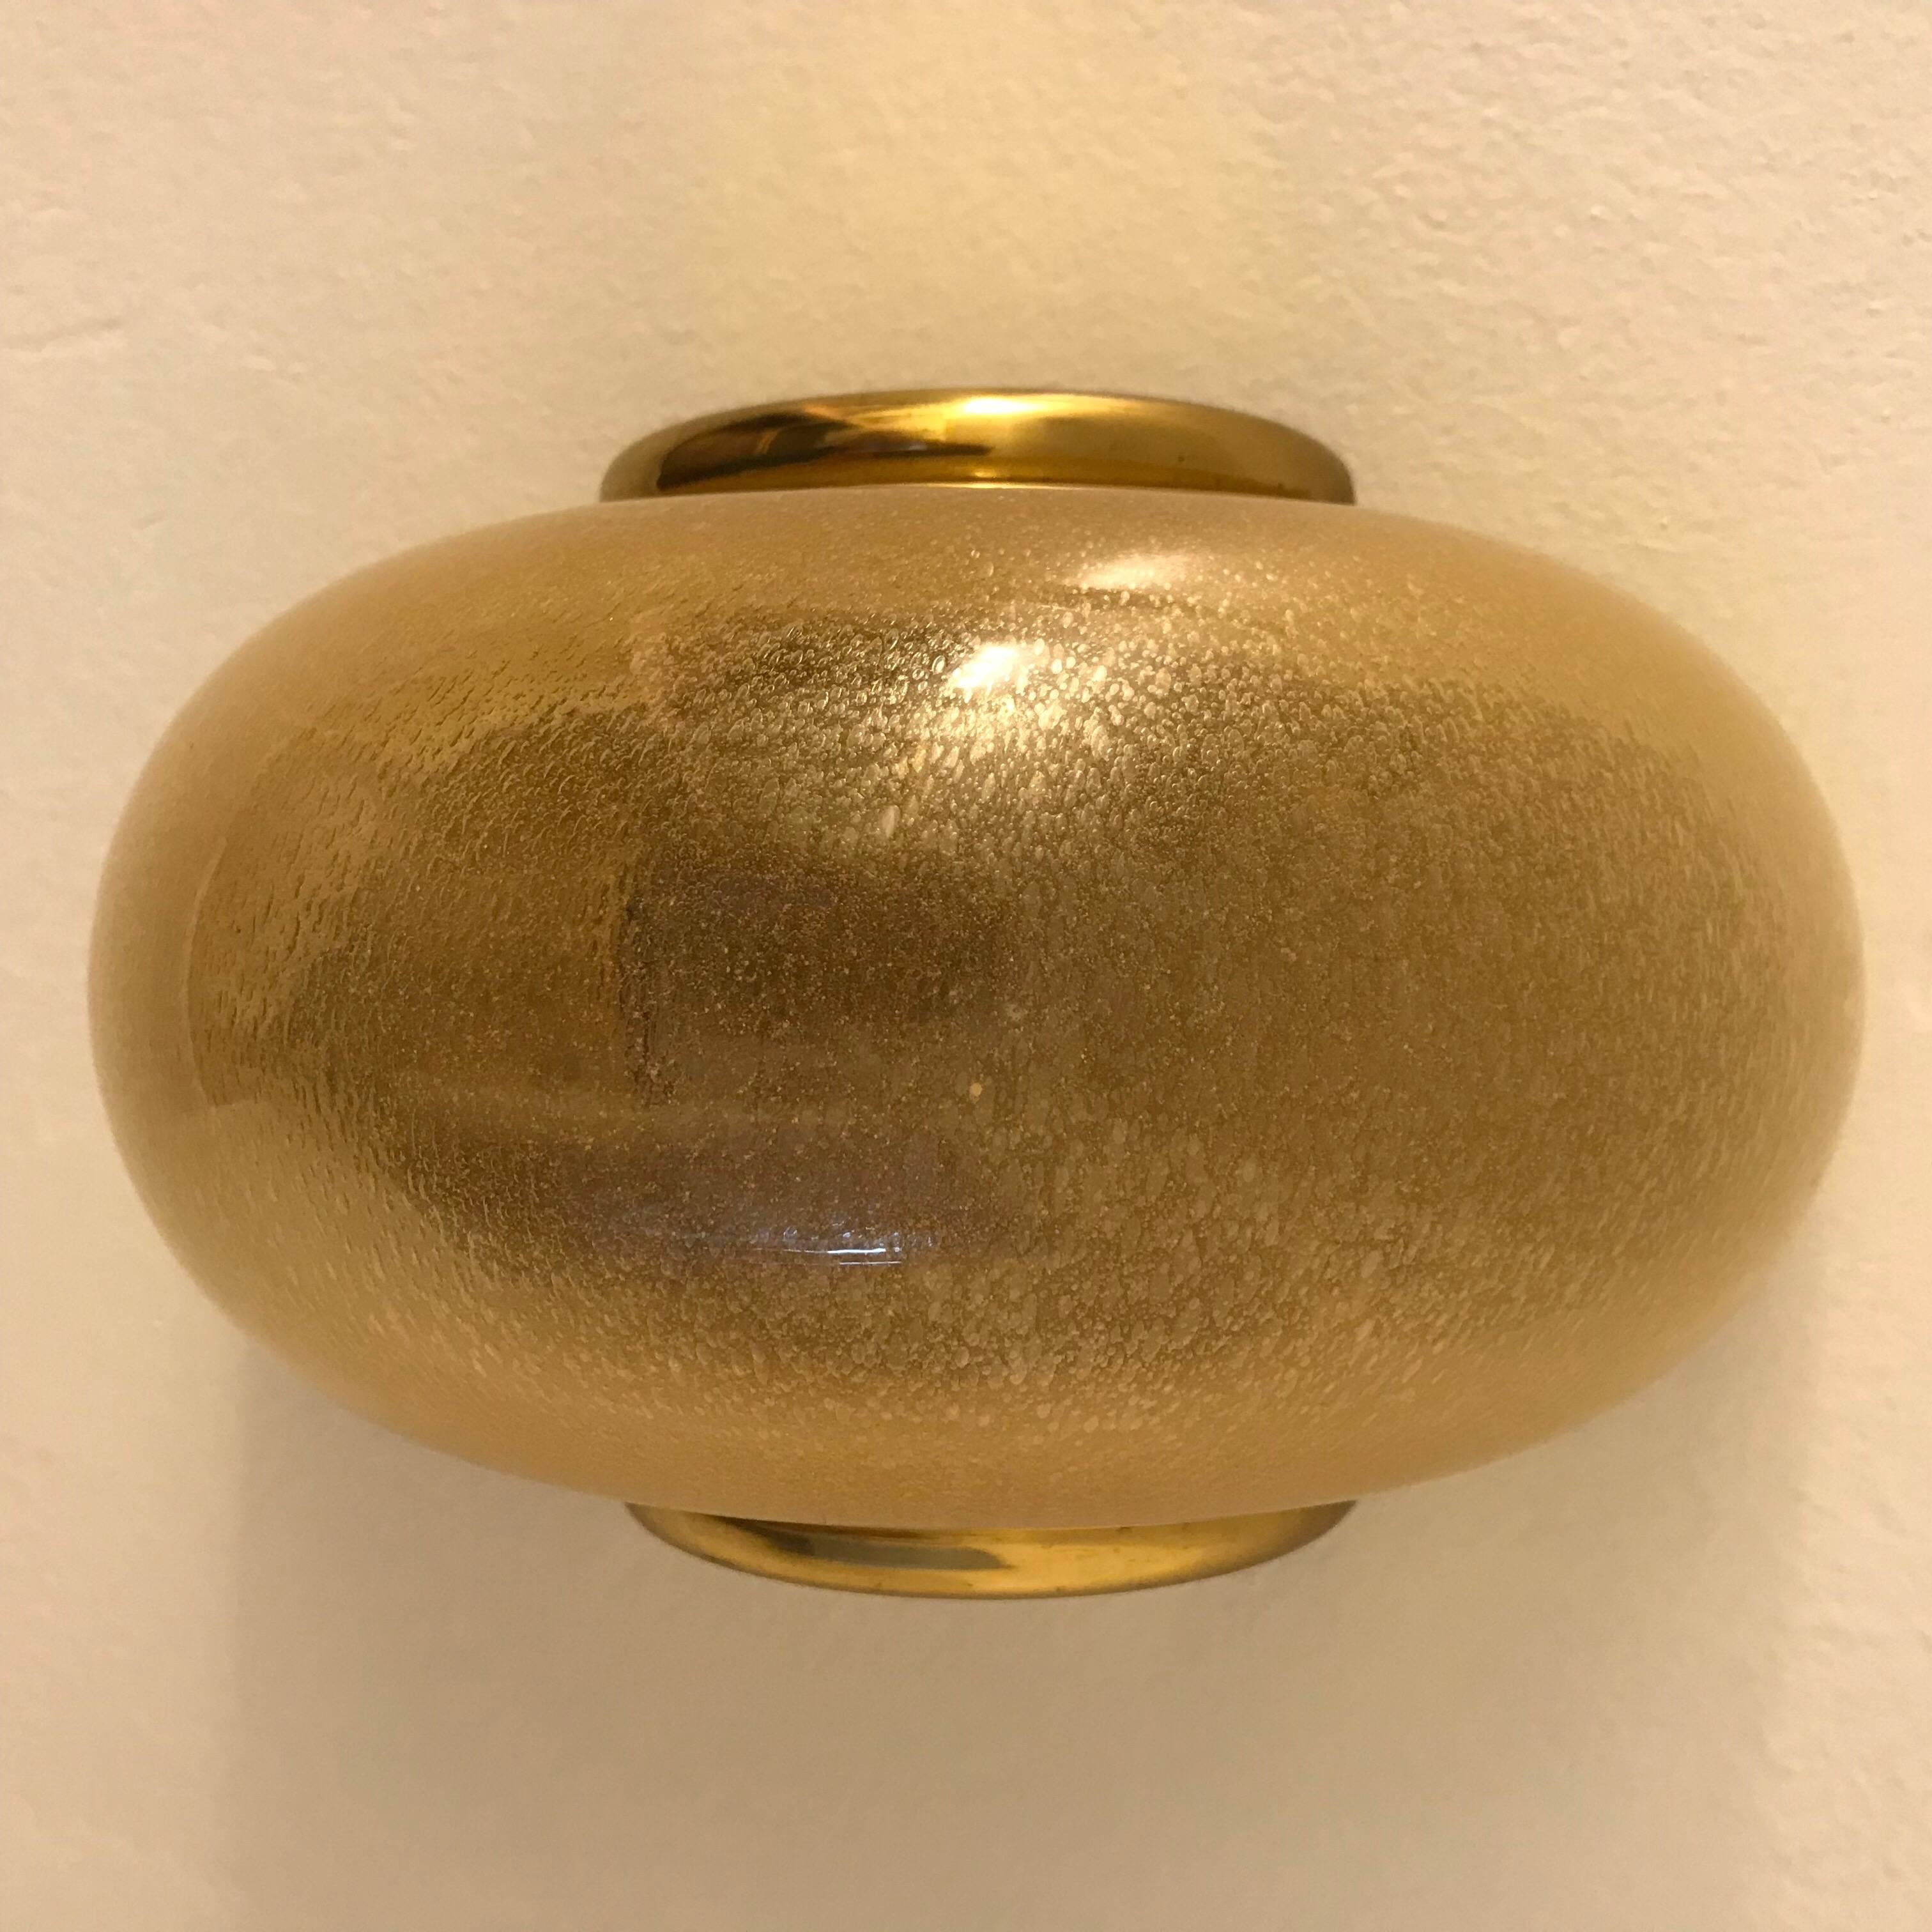 A luxurious set of three, 1980s Italian Murano glass and polished brass wall lights. The thick glass shades have an inset layer gold . The sconces can be hung vertical or horizontal. Newly Rewired . Each contains a standard 100 watt socket.